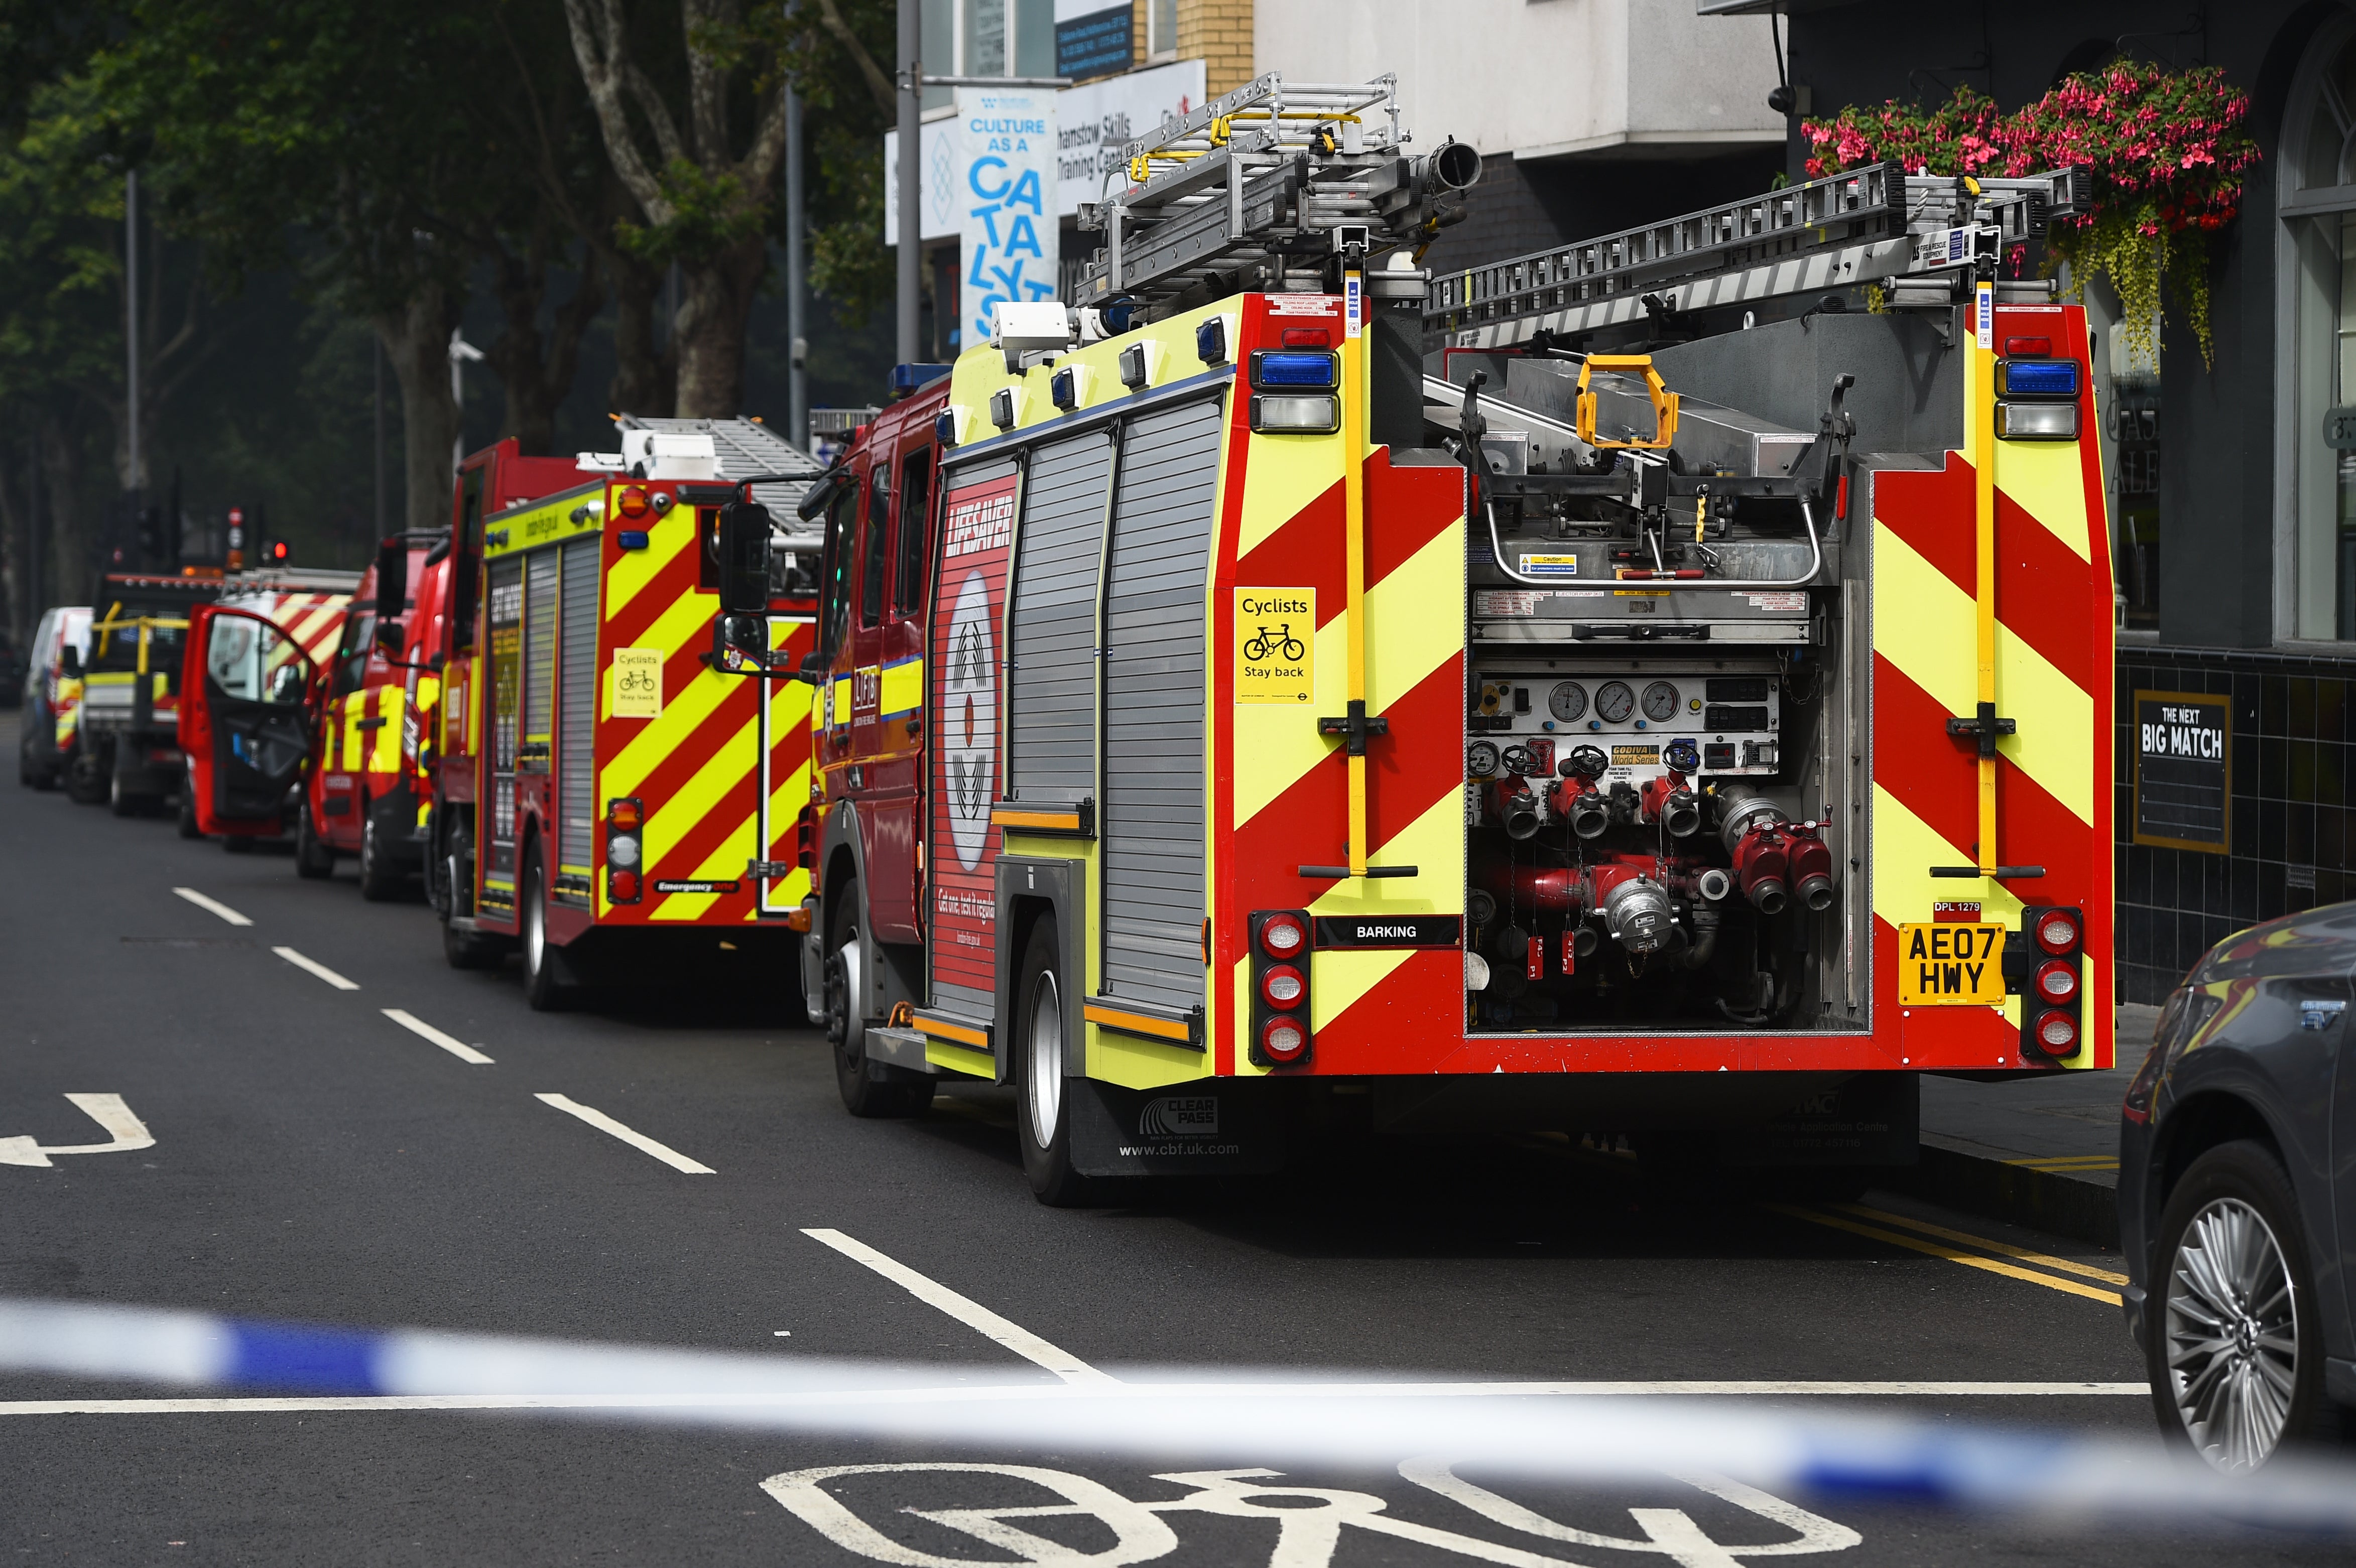 Around 100 fire fighters and more than a dozen fire engines were called to building fire on Mavis Grove in Hornchurch, east London, after a fire broke out on the second floor (Kirsty O’Connor/PA)